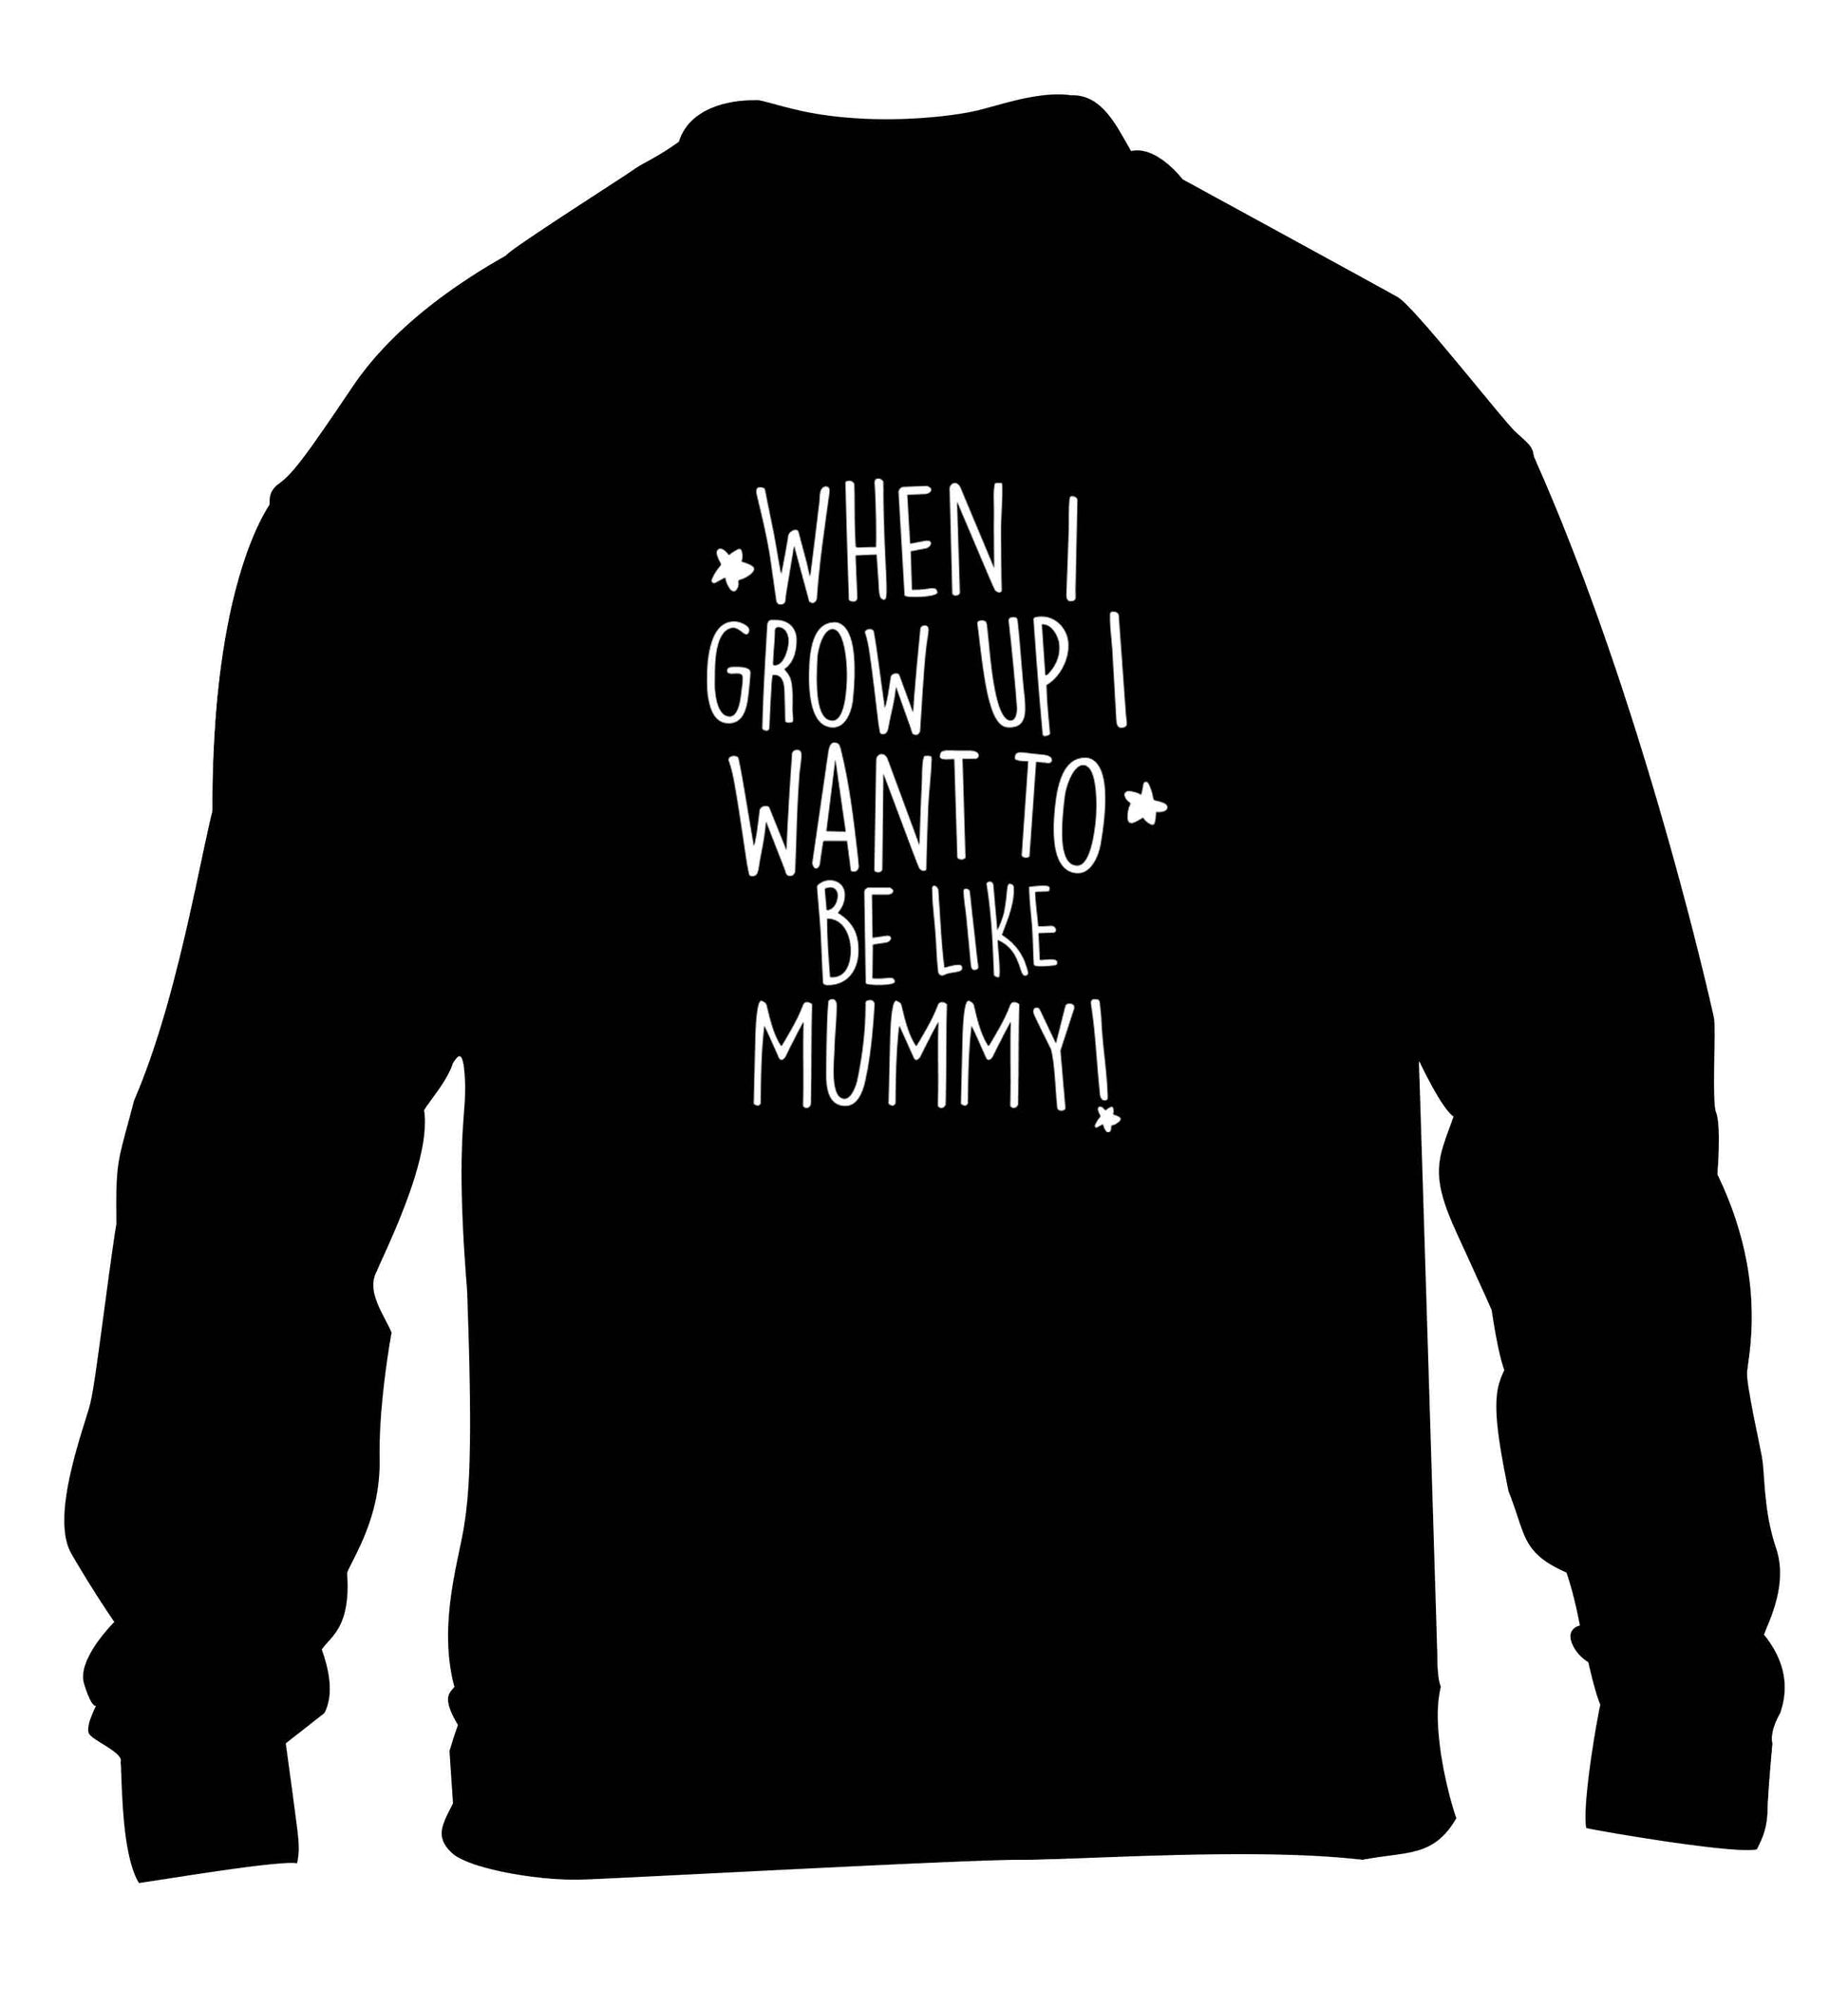 When I grow up I want to be like my mummy children's black sweater 12-13 Years